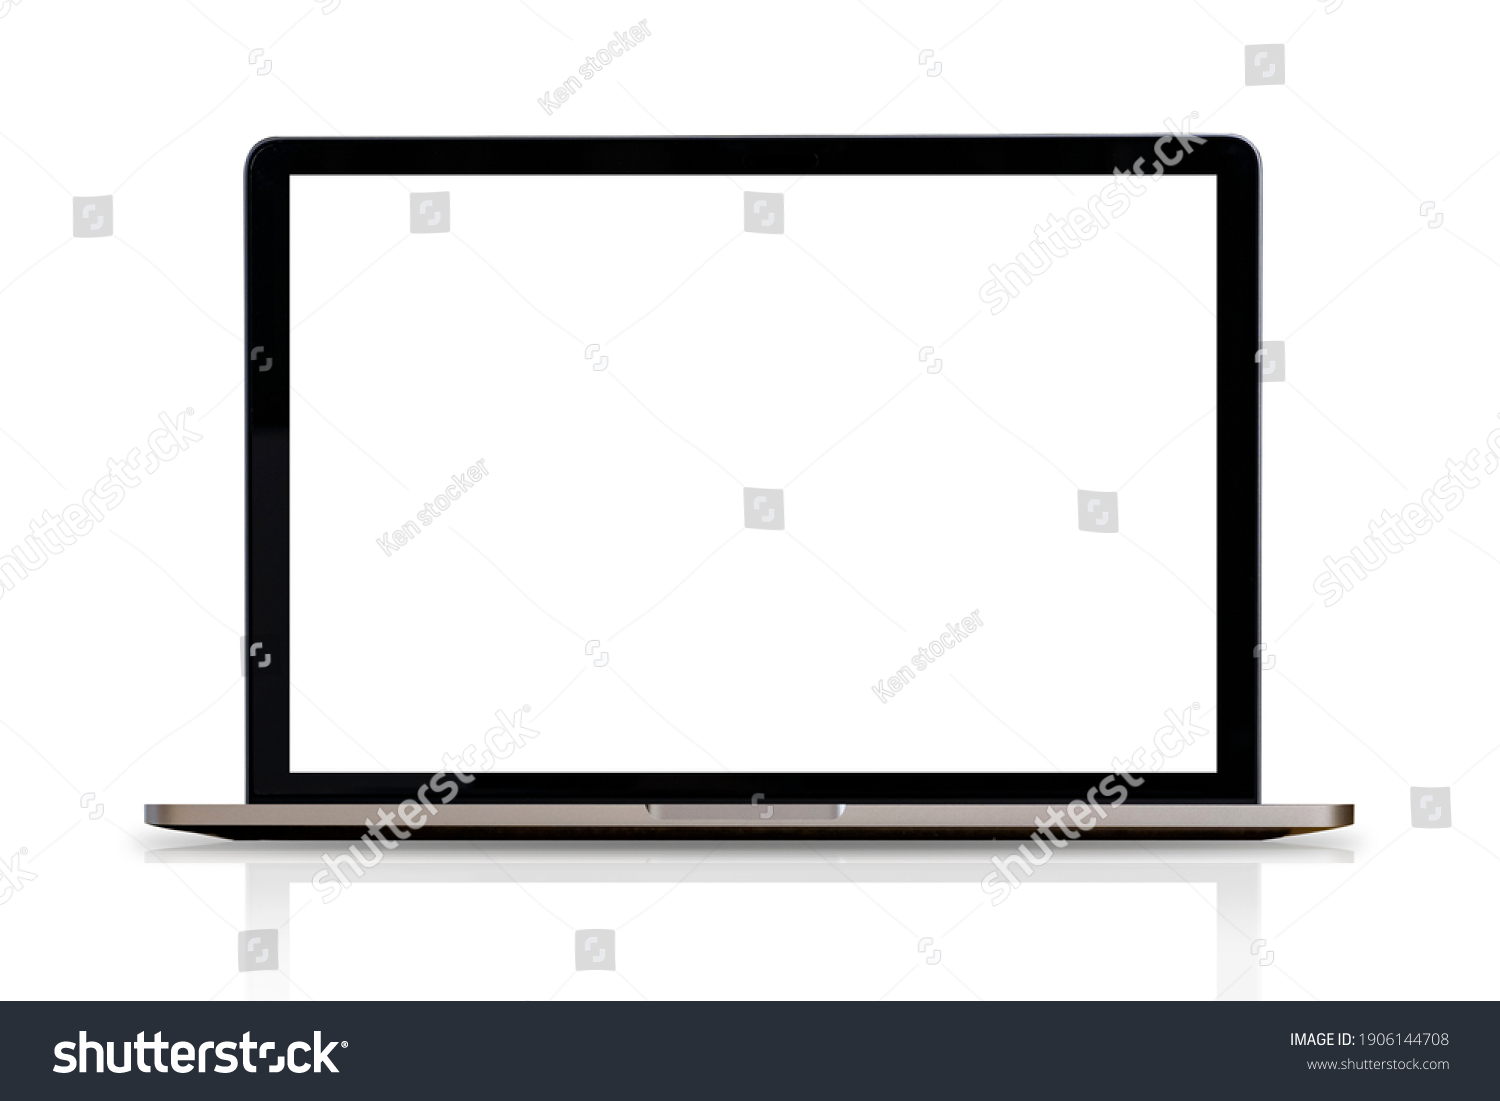 Laptop or notebook isolate on white background, clipping path  #1906144708